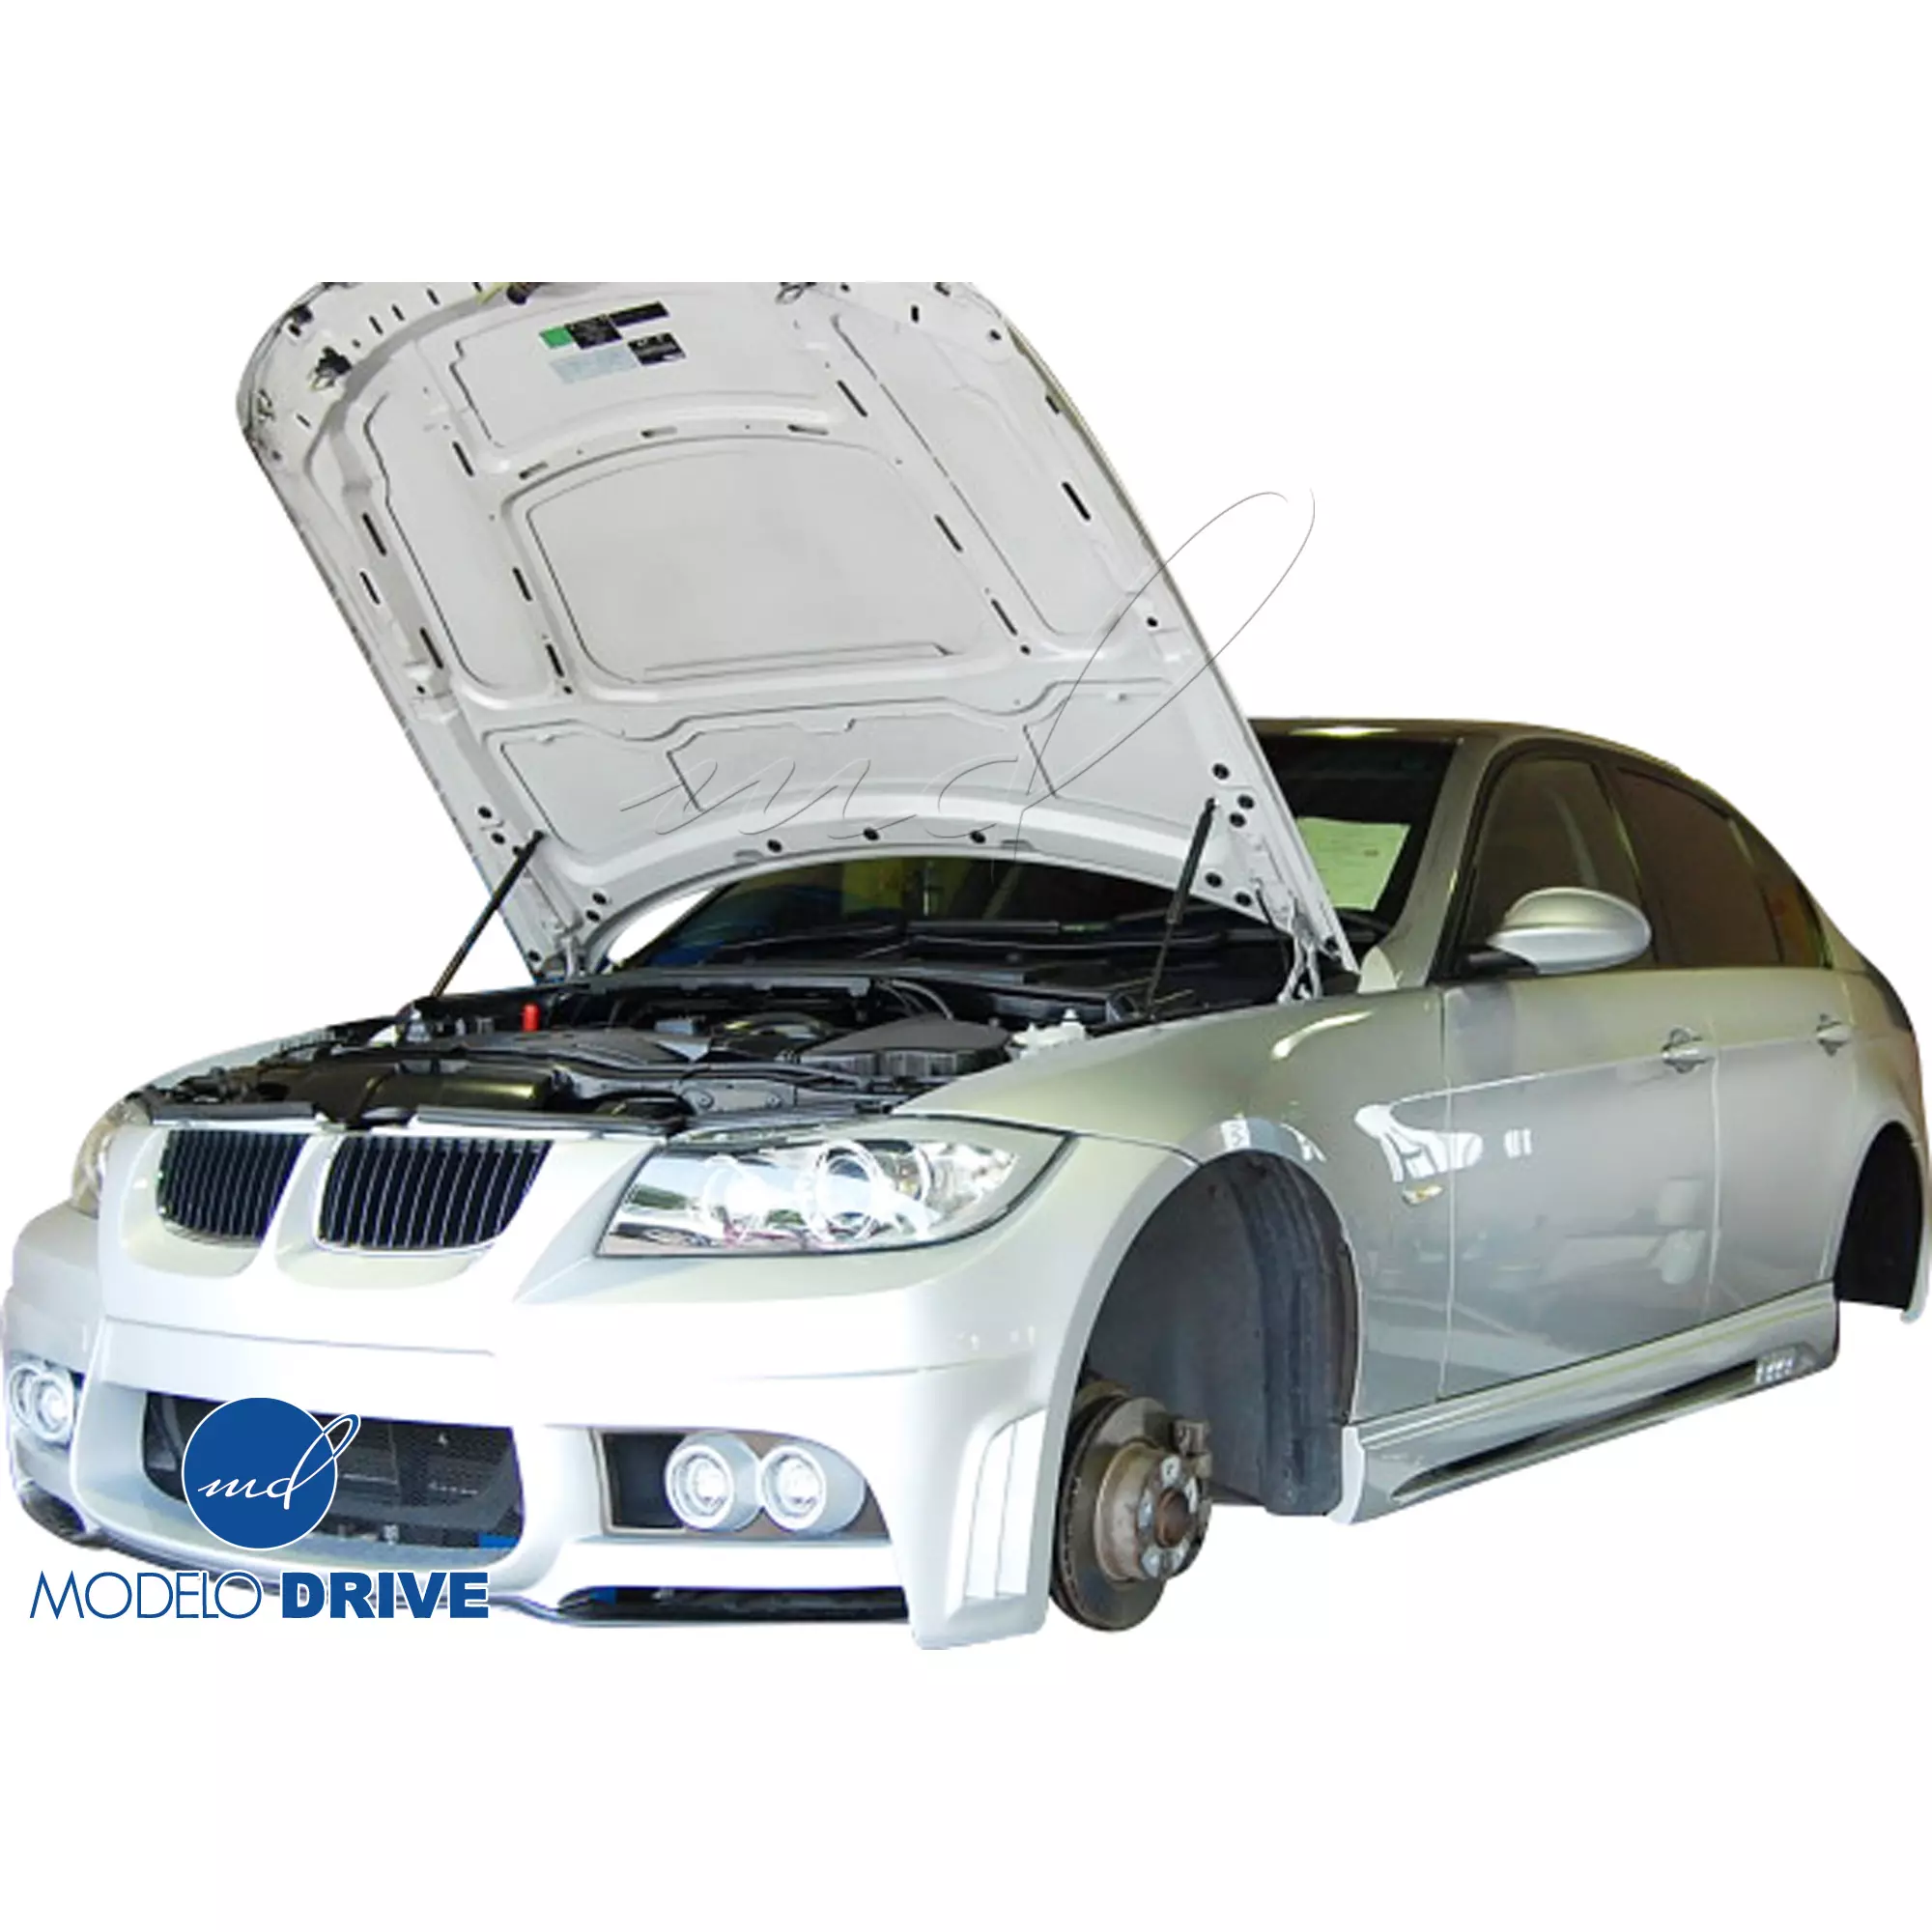 ModeloDrive FRP WAL BISO Front Bumper > BMW 3-Series E90 2007-2010> 4dr - Image 8